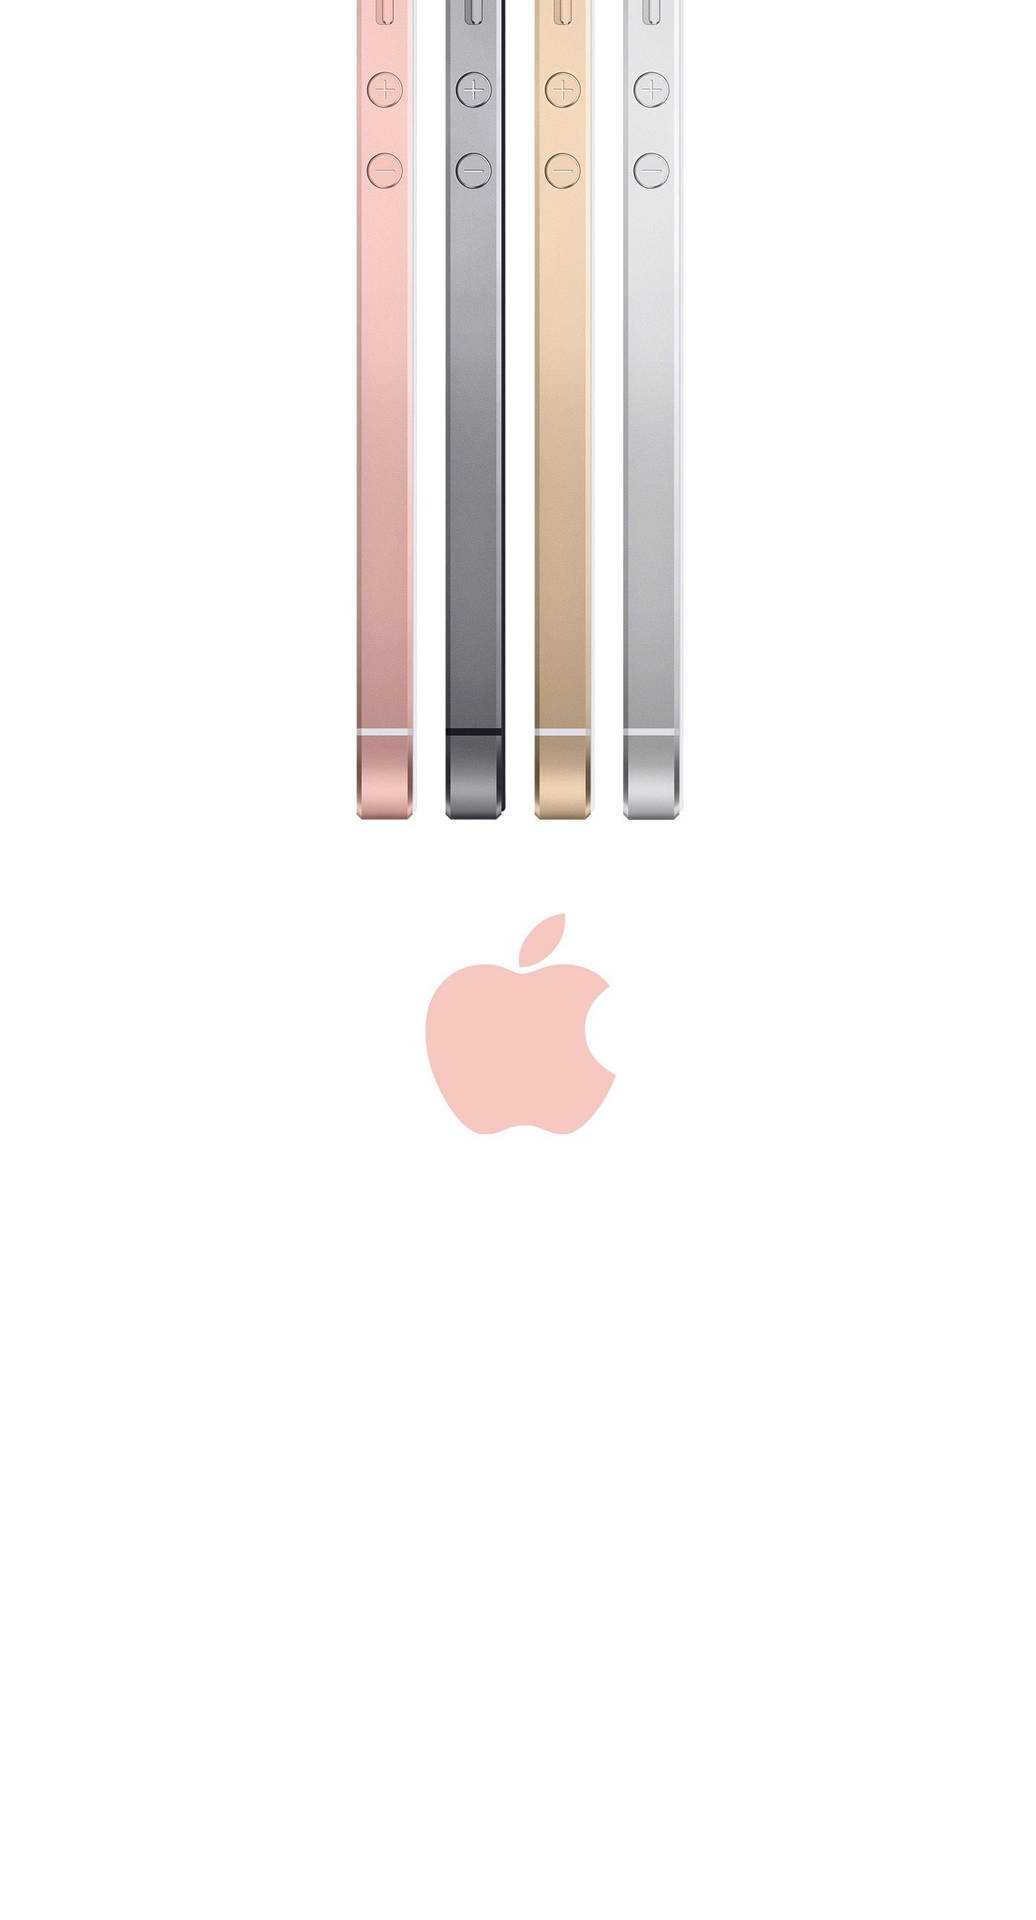 Iphone5s - Hd Tapeter Wallpaper